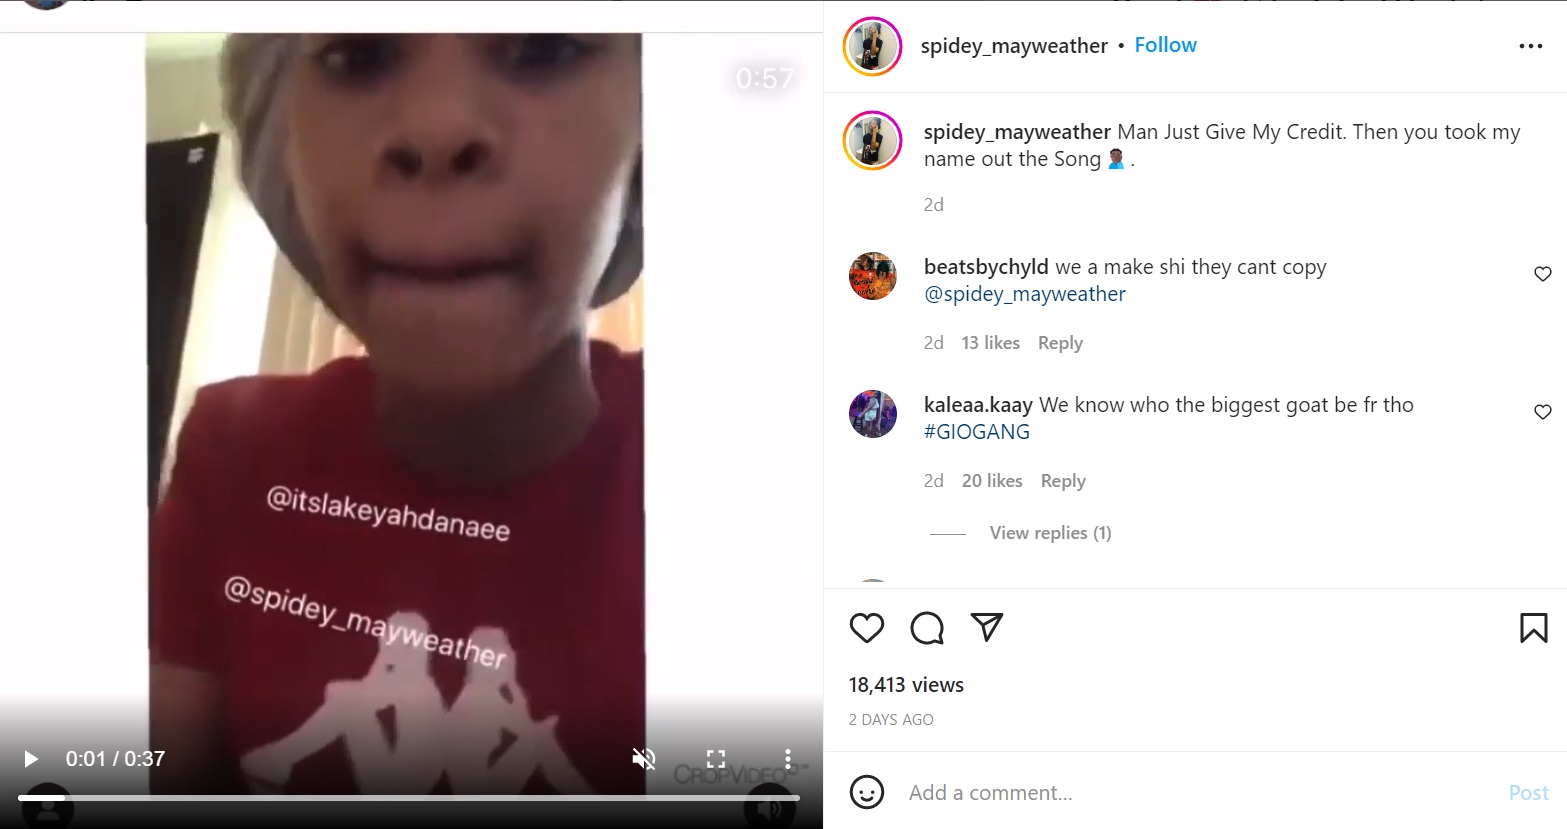 Spidey Mayweather exposes Lakeyah for stealing his song Goat